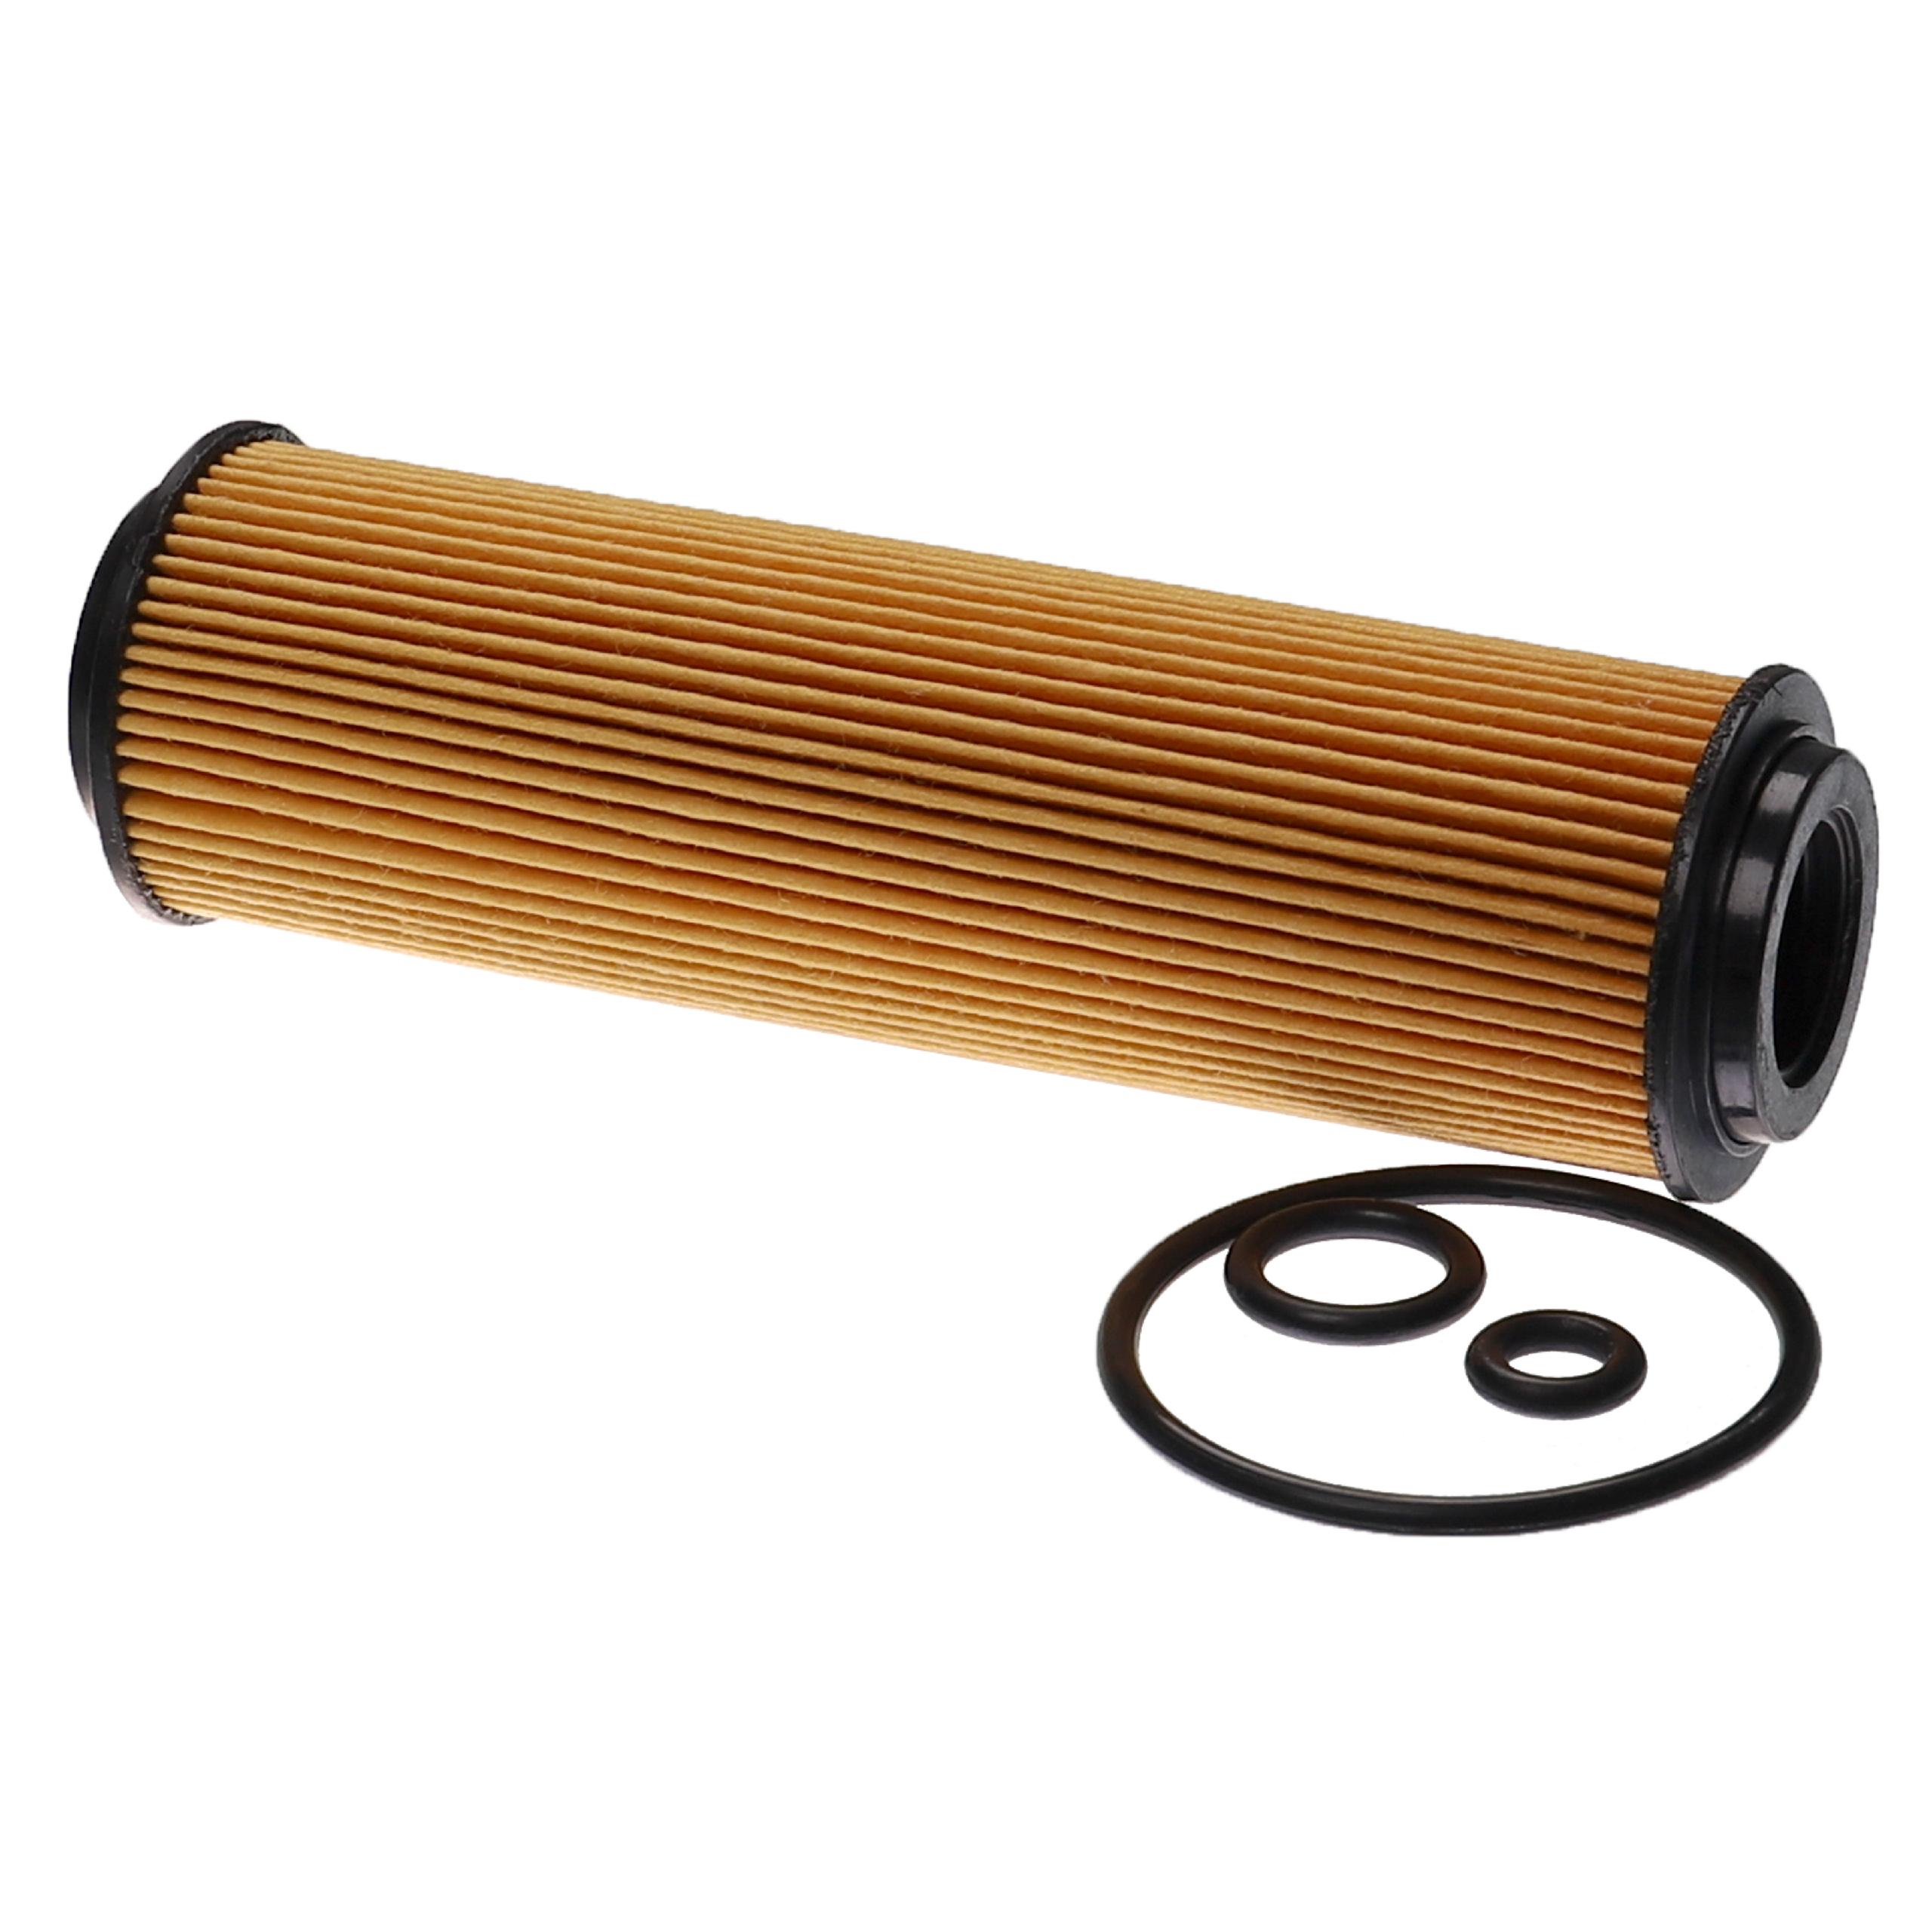 Vehicle Oil Filter as Replacement for Mercedes-Benz 2711840125, 2711800009, 2711800109 - Spare Filter